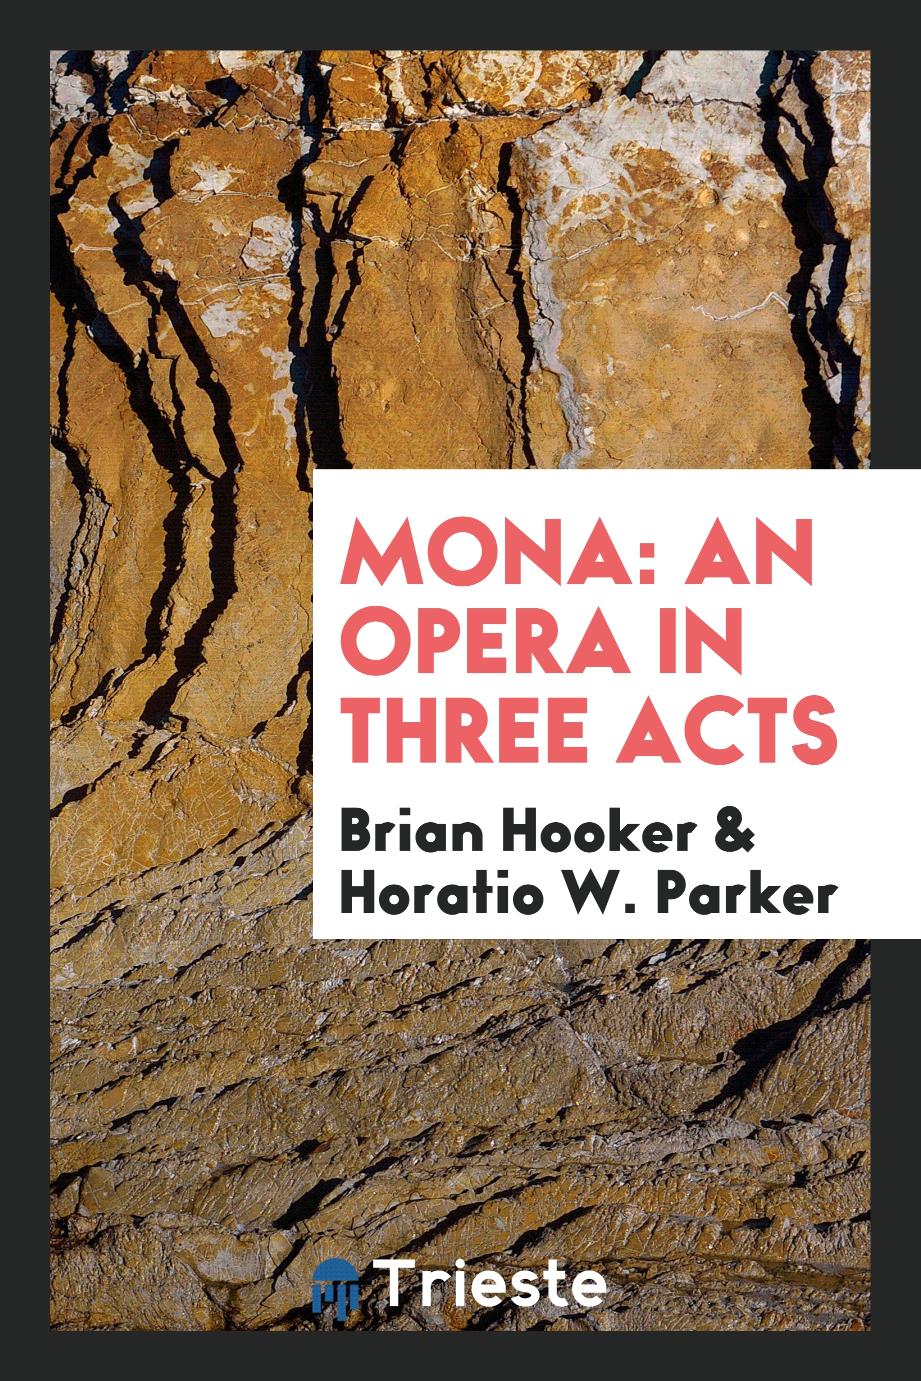 Mona: an opera in three acts